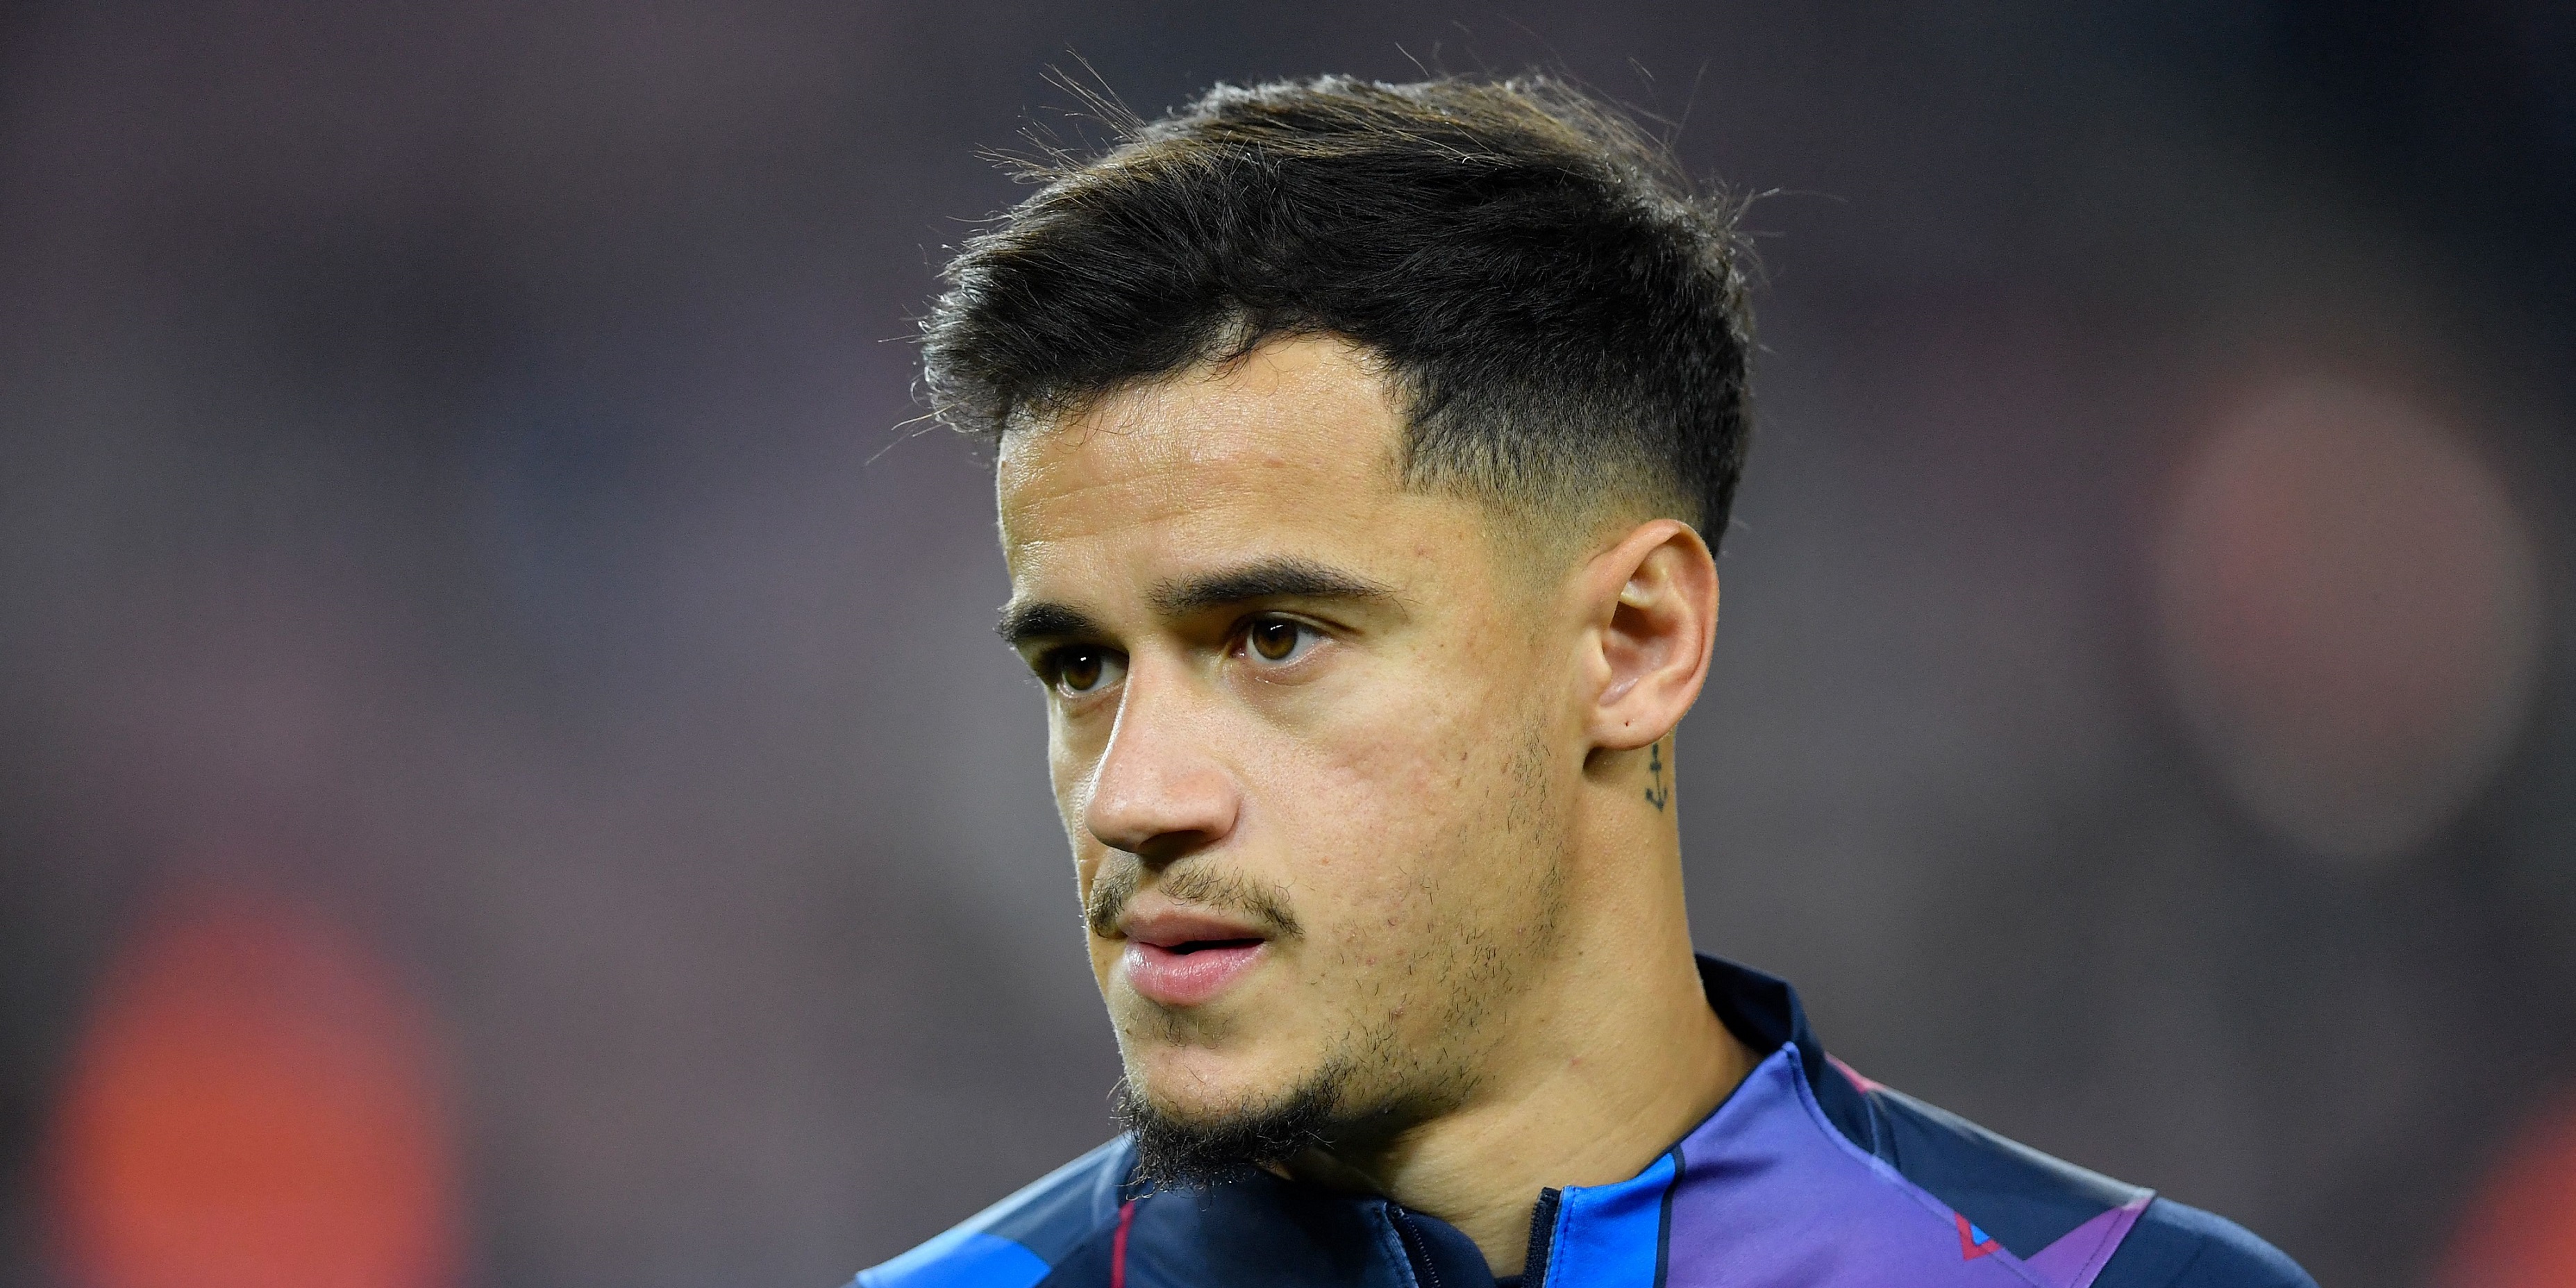 Status of Coutinho transfer negotiations revealed as Liverpool one of three PL clubs interested says Marcelo Hazan